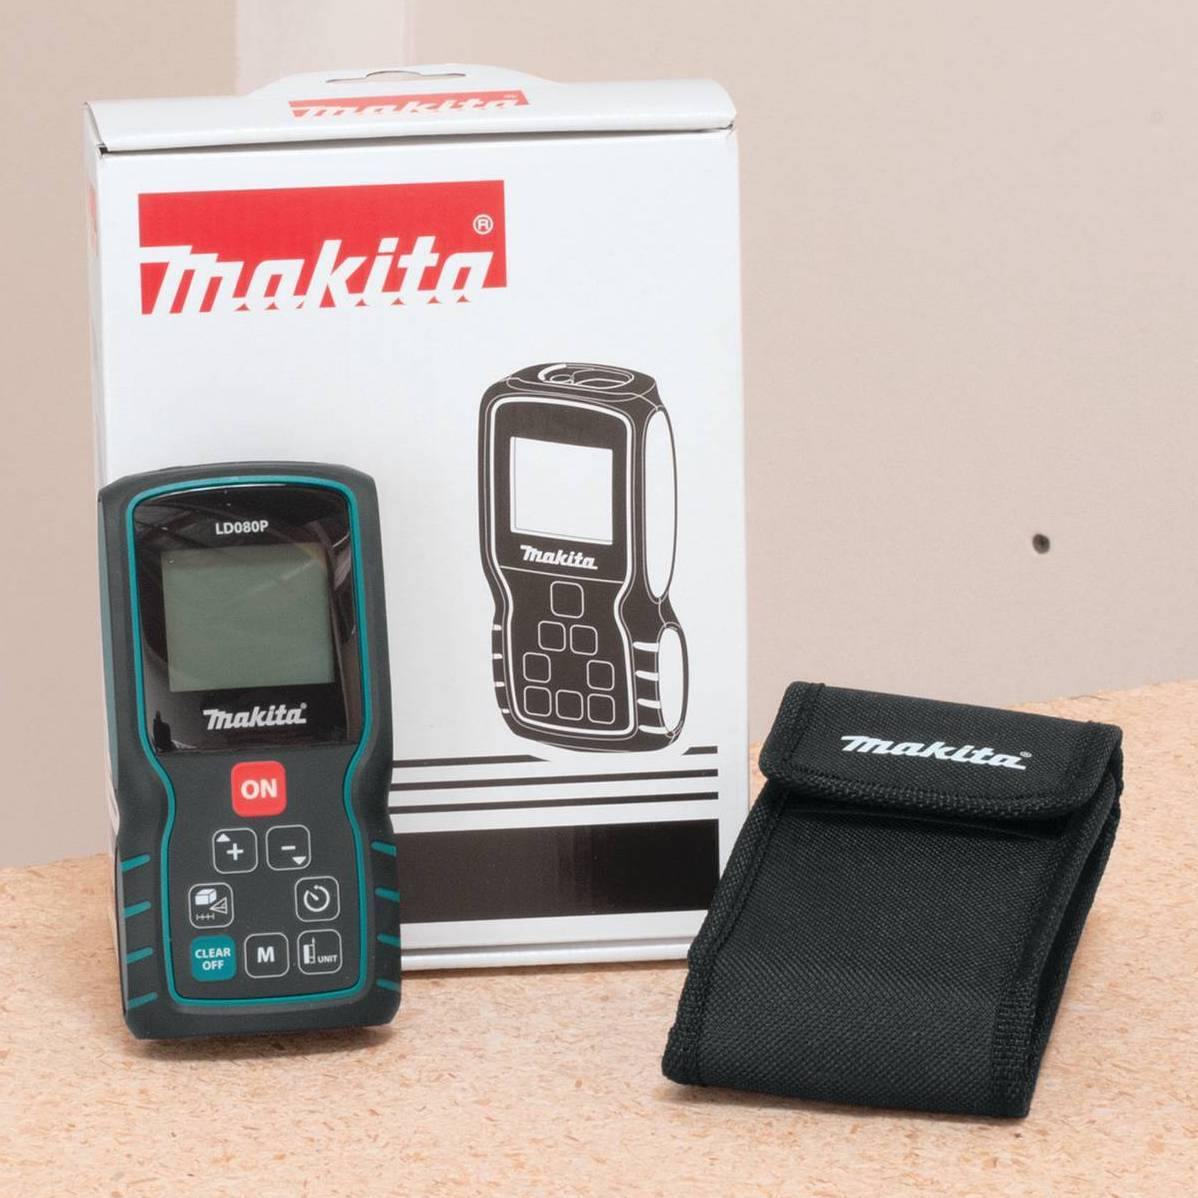 Makita Laser Distance Measure LD080Pi Power Tool Services